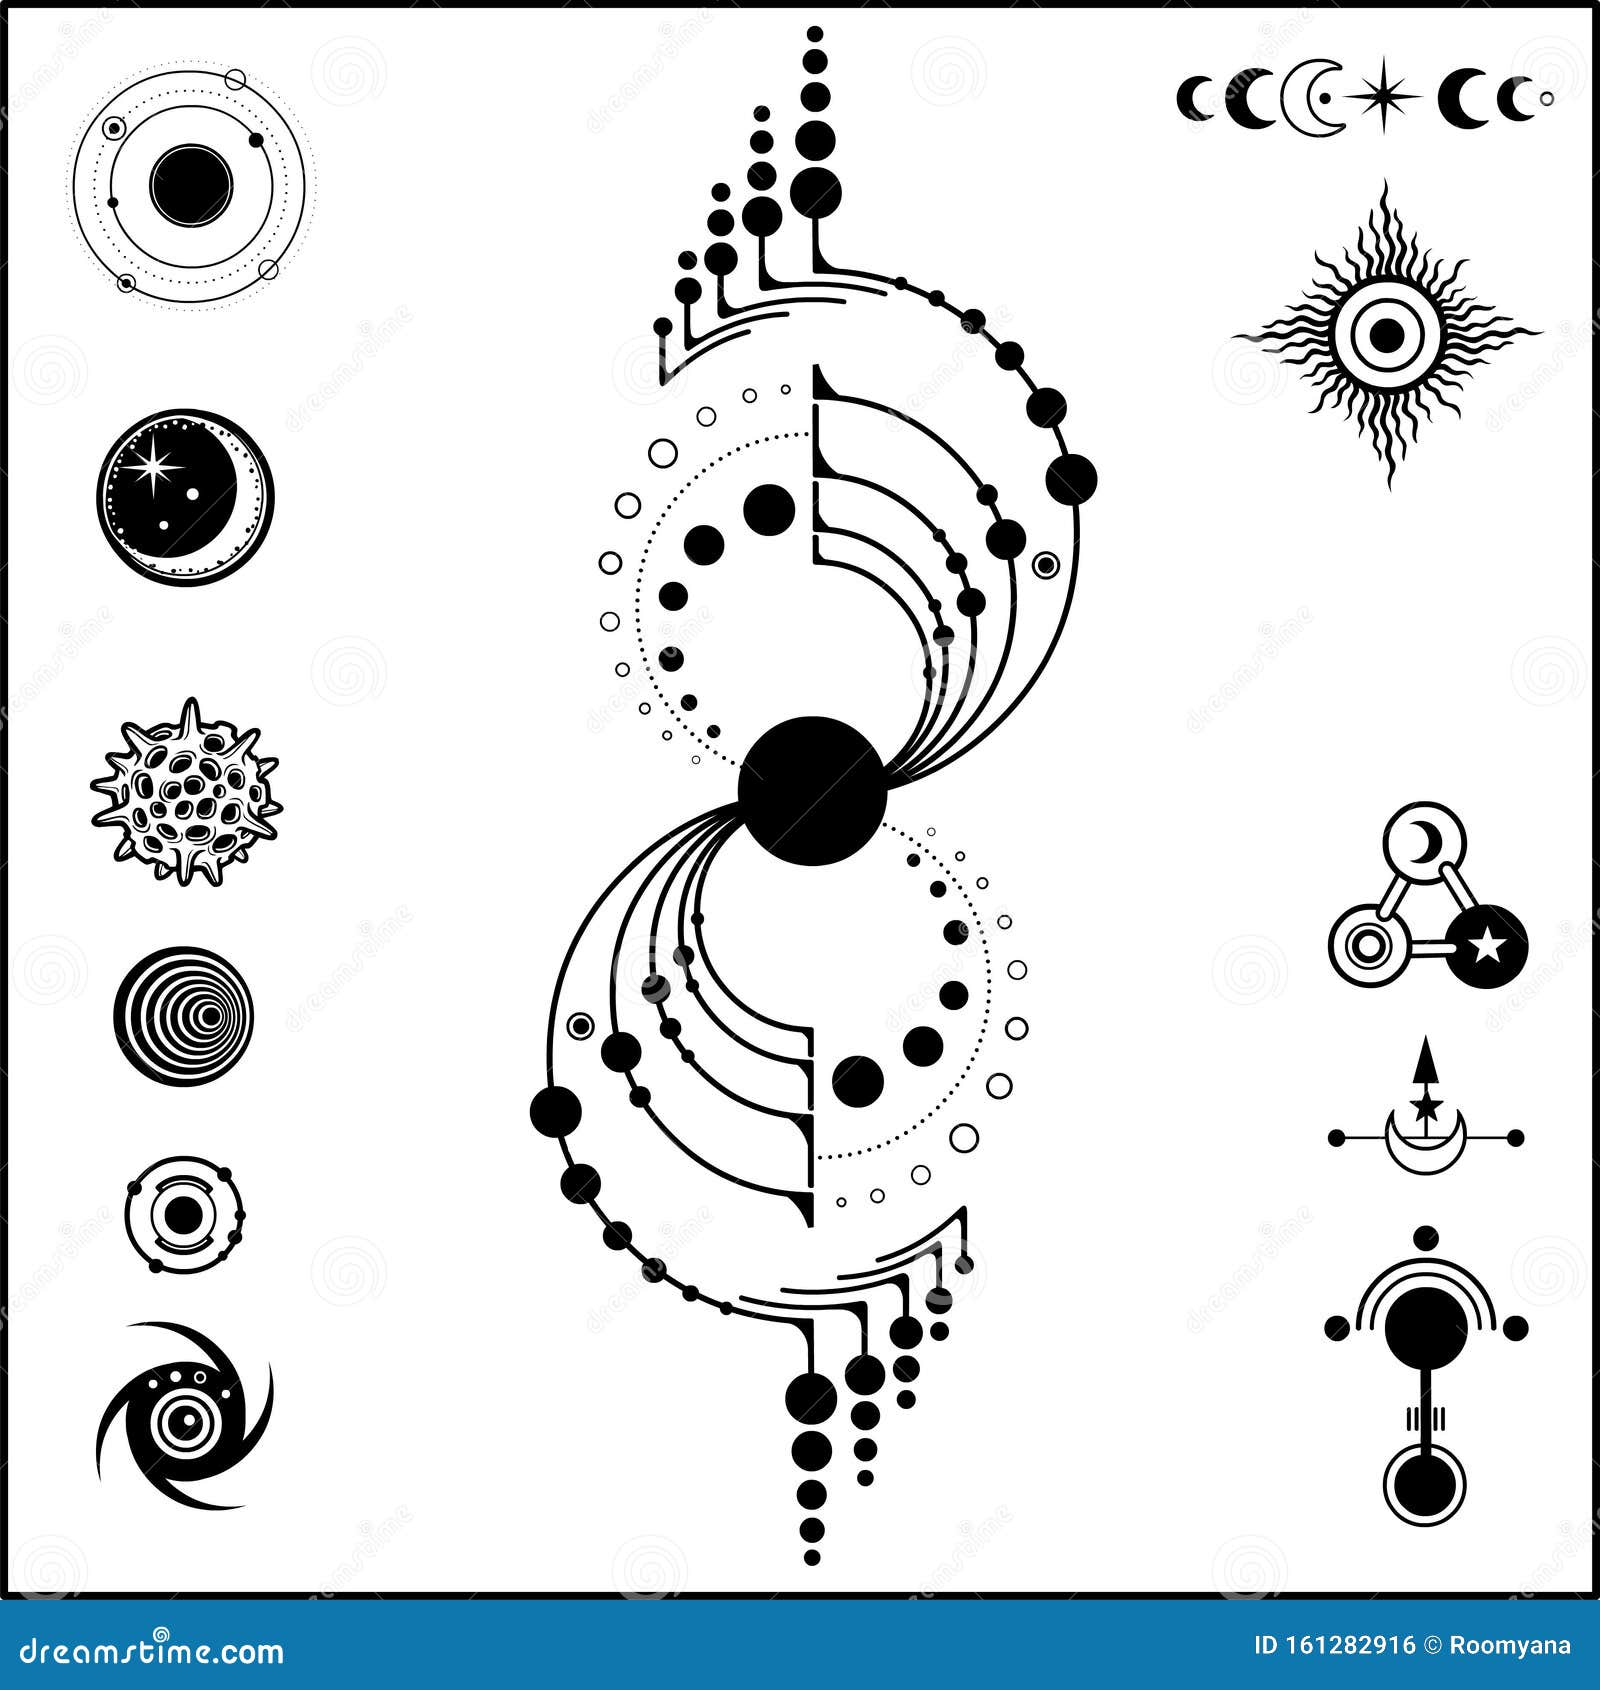 mystical drawing: mysterious crop circle ufo, stylized galaxy, set of cosmic s.